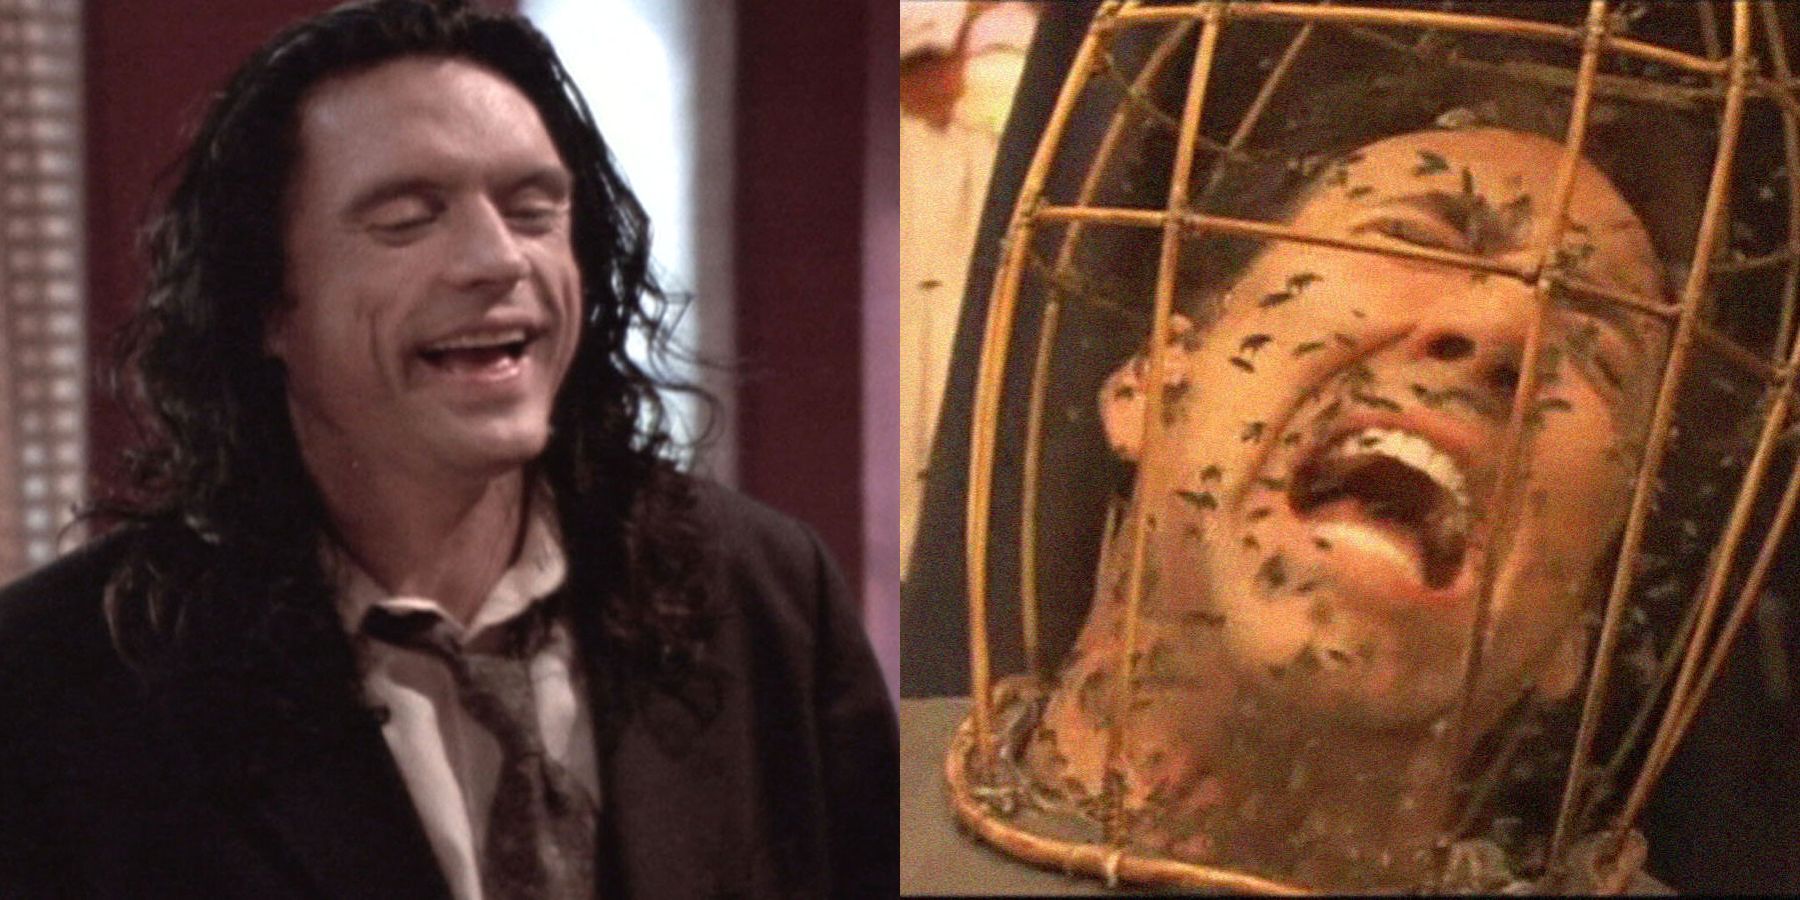 the movies that are so bad they are good: The Room and The Wicker Man